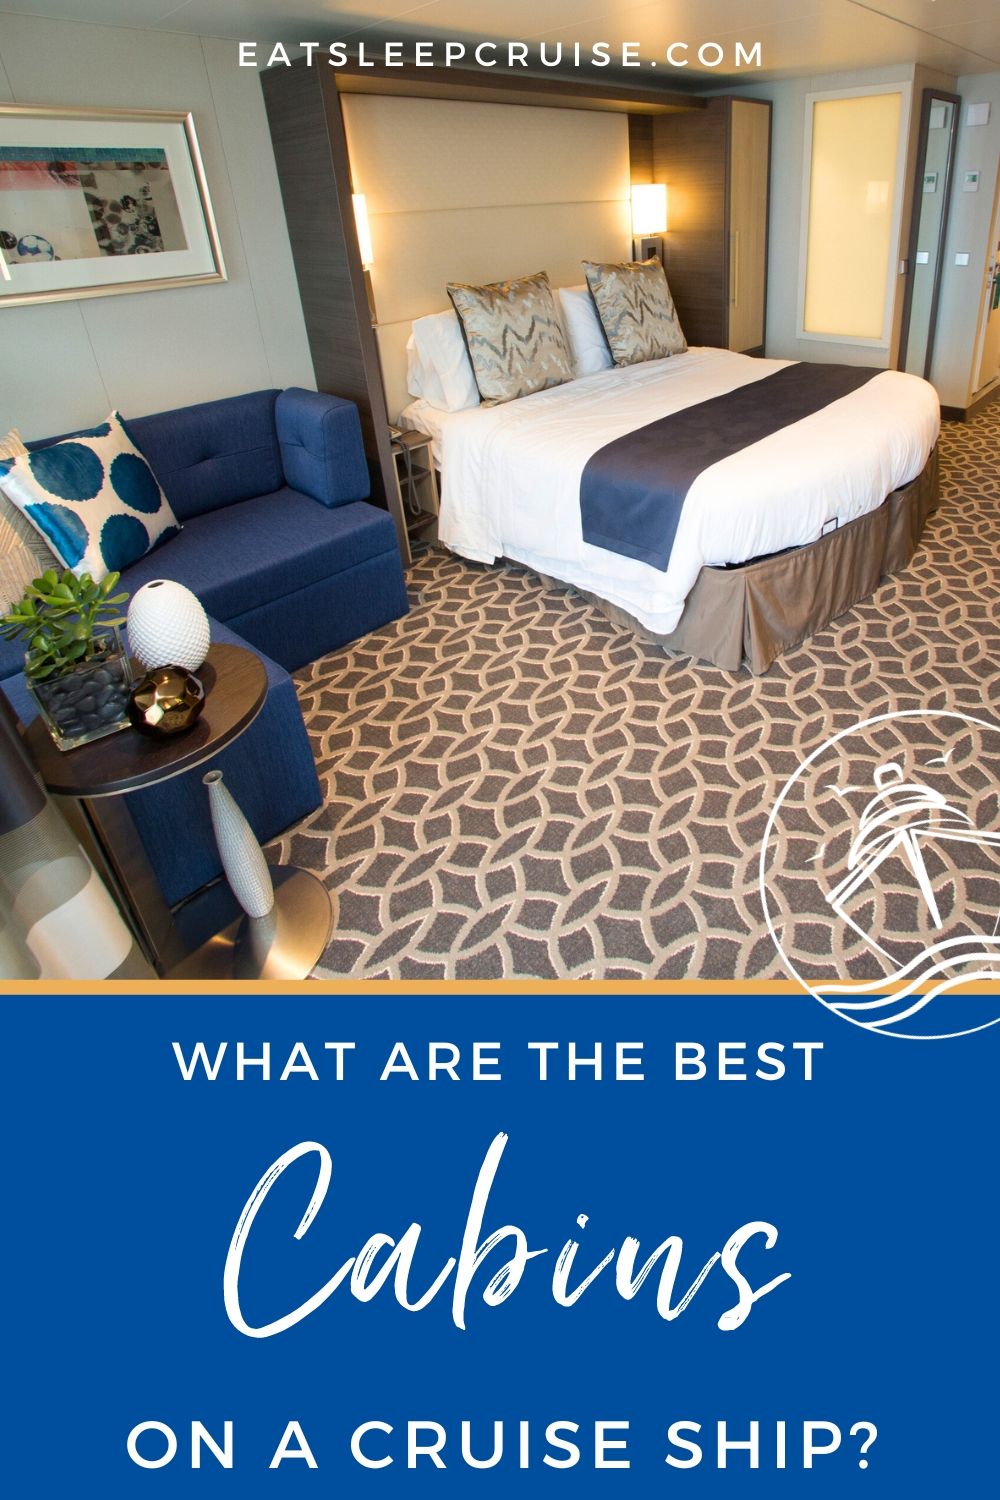 What Are the Best Rooms on a Cruise Ship?